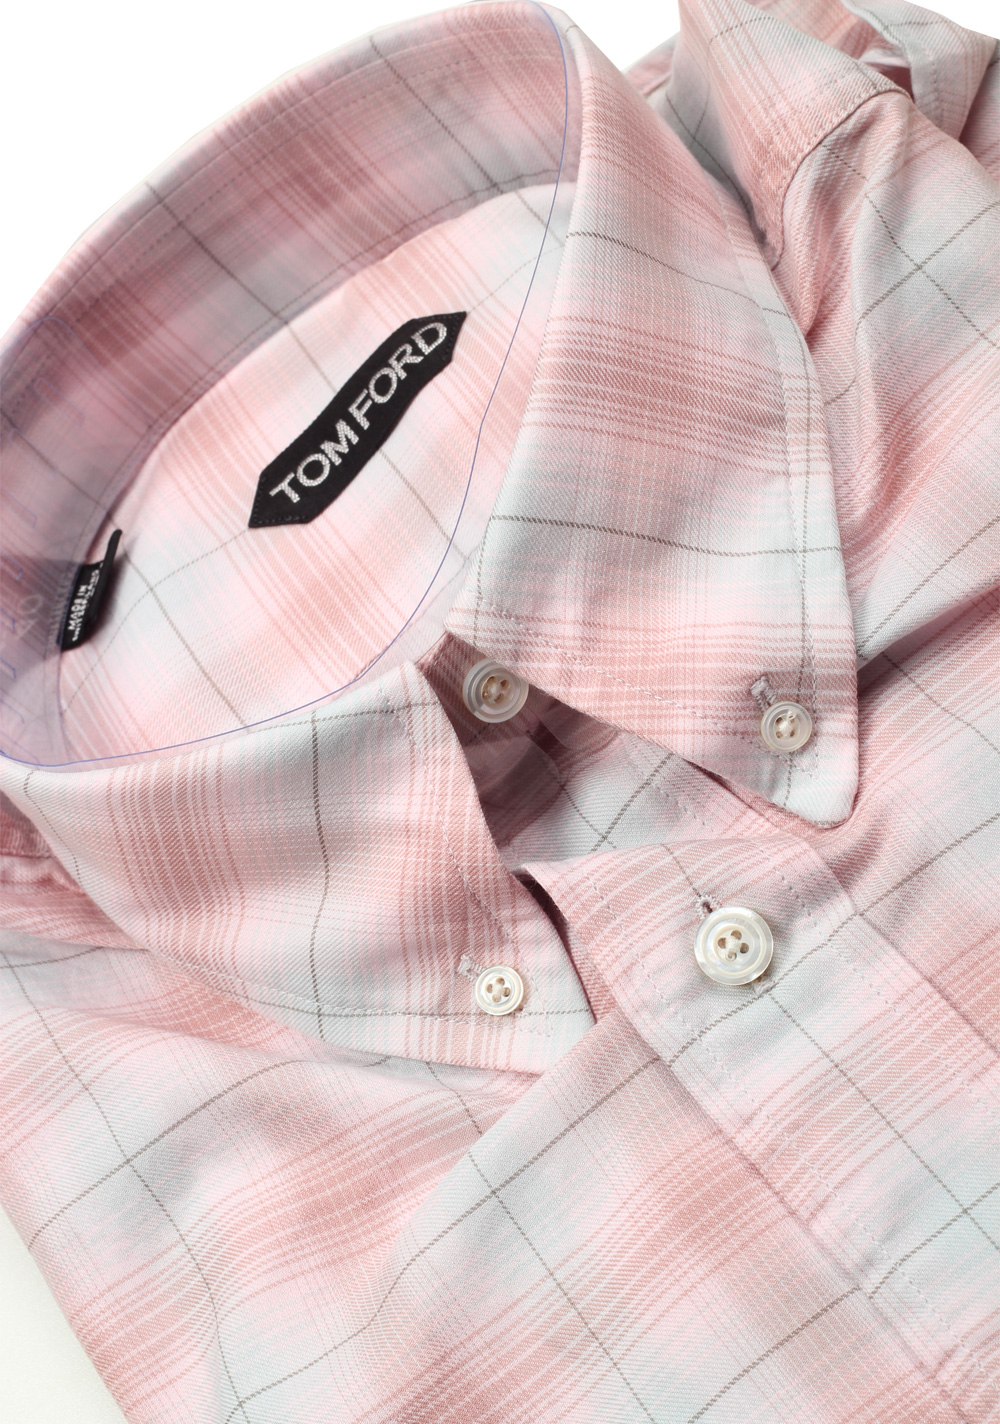 TOM FORD Checked White Pink Casual Button Down Shirt Size 40 / 15,75 U.S. | Costume Limité